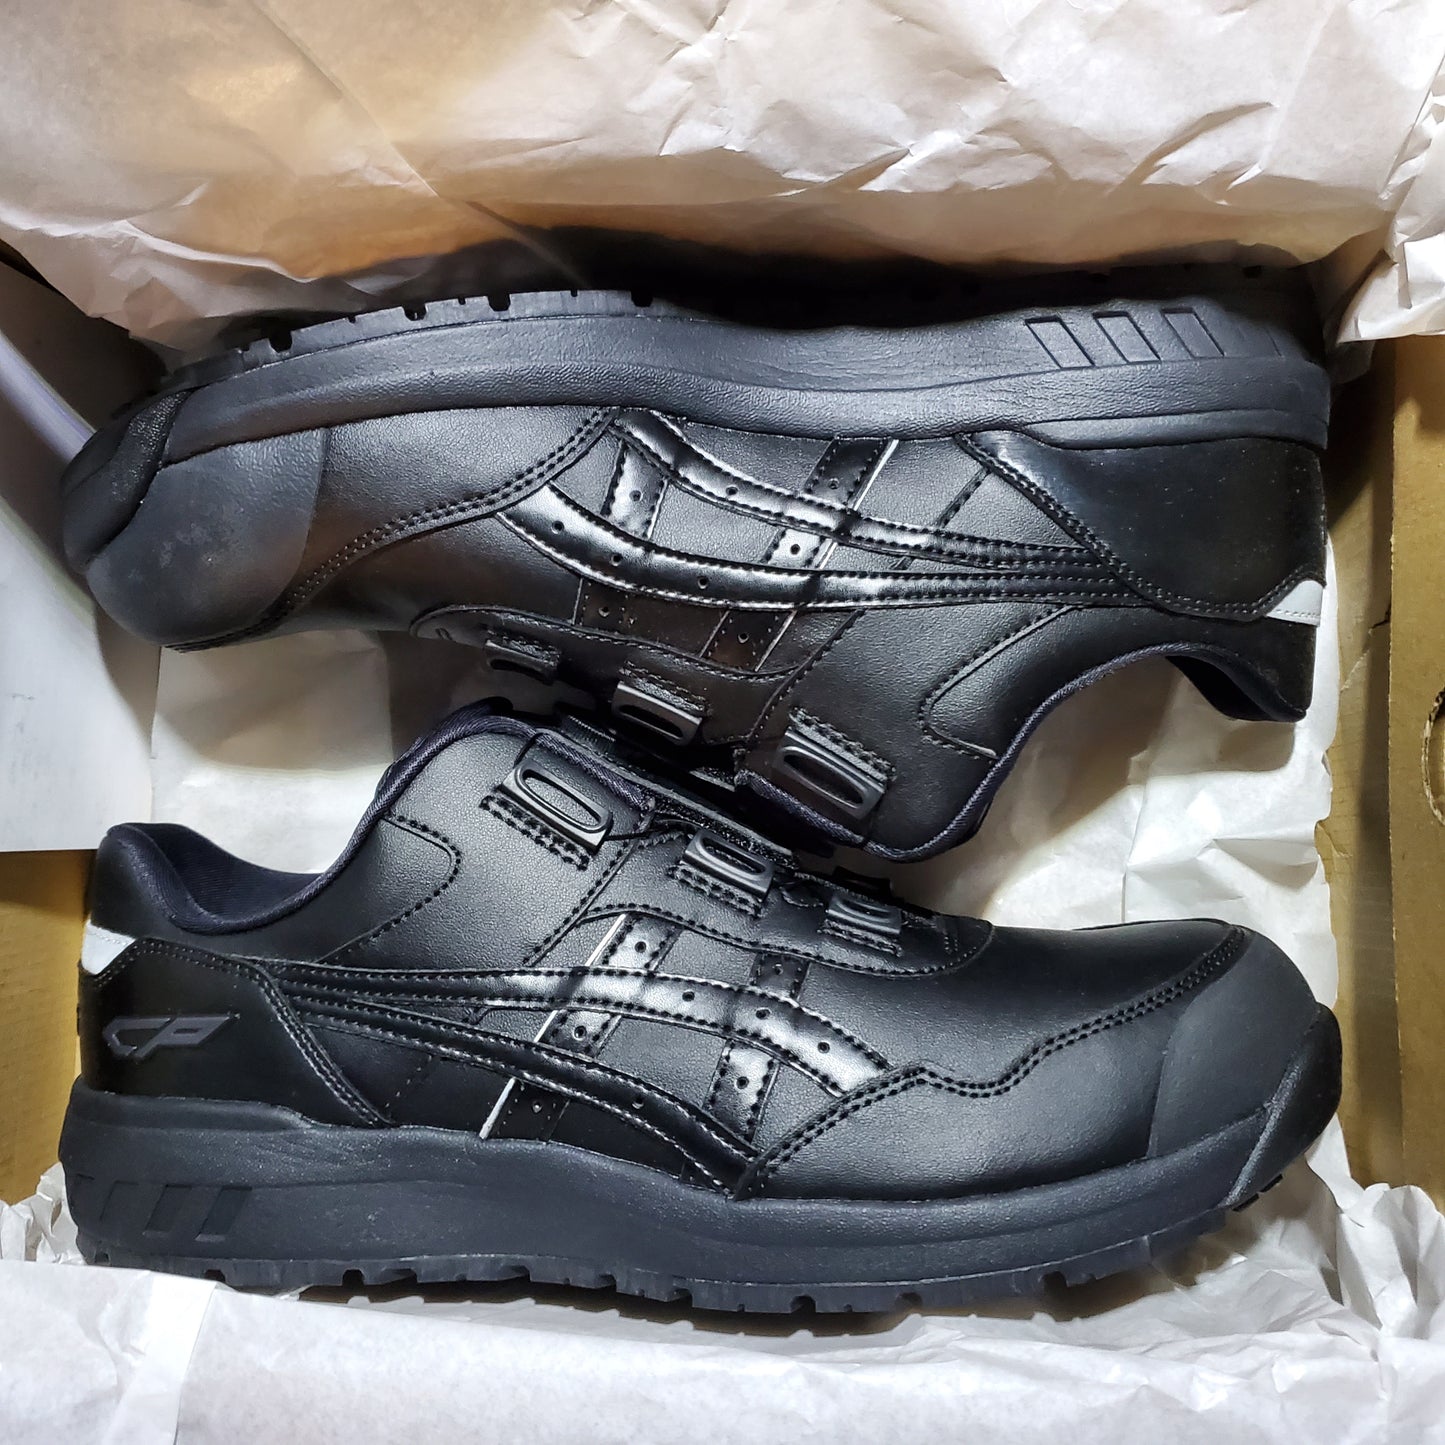 Japan [Order] ASICS safety shoes BOA twist buckle anti-slip shoes black cp306